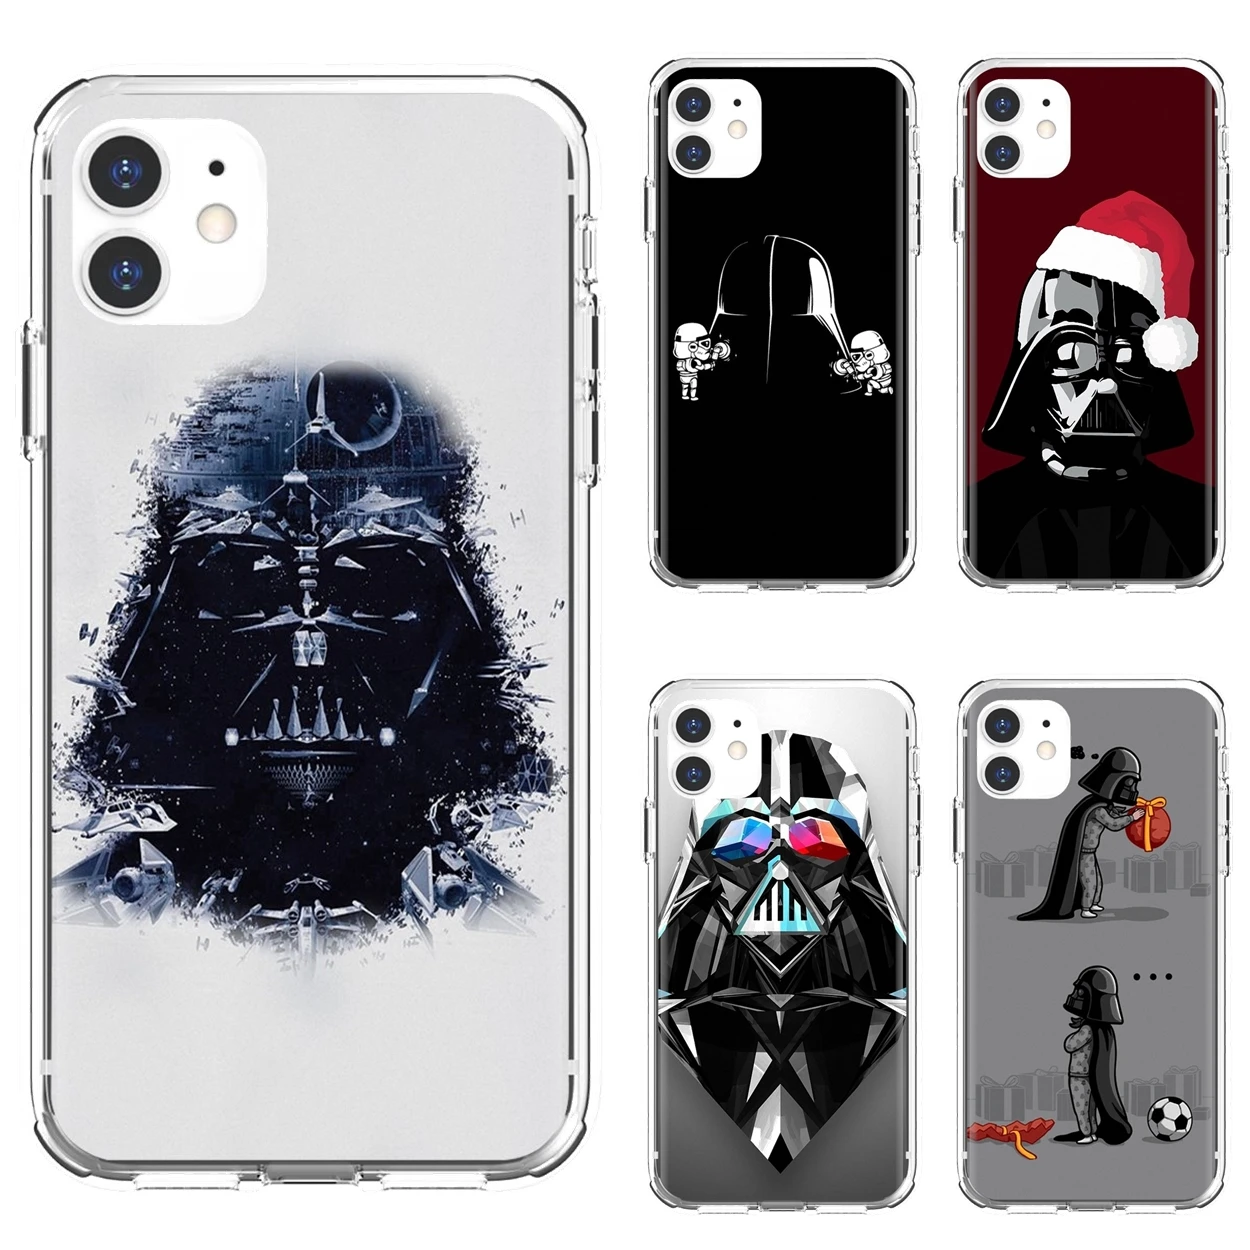 the-force-awakens-darth-vader For iPod Touch 5 6 Xiaomi Redmi S2 6 Pro 5A Pocophone F1 LG G6 Q6 Q7 G5 Transparent TPU Skin Cover